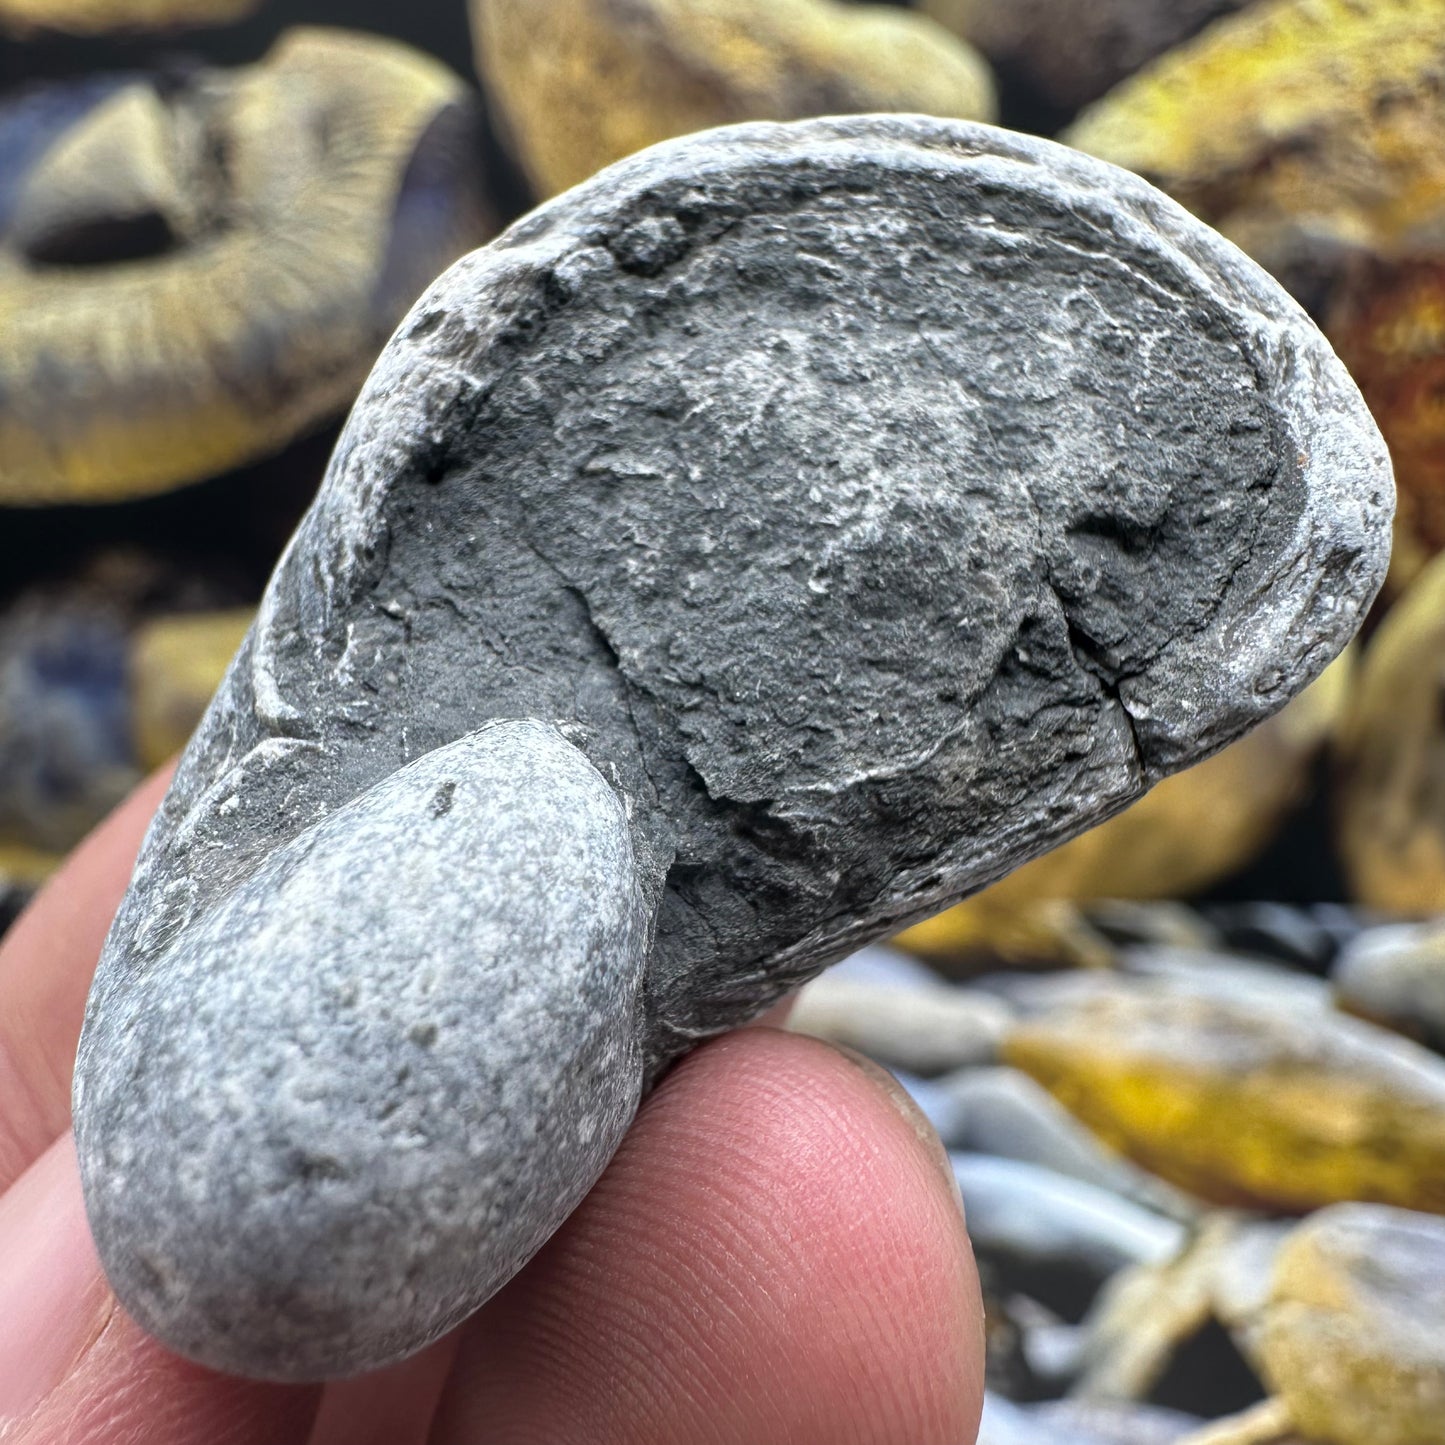 Gryphaea shell fossil - Whitby, North Yorkshire